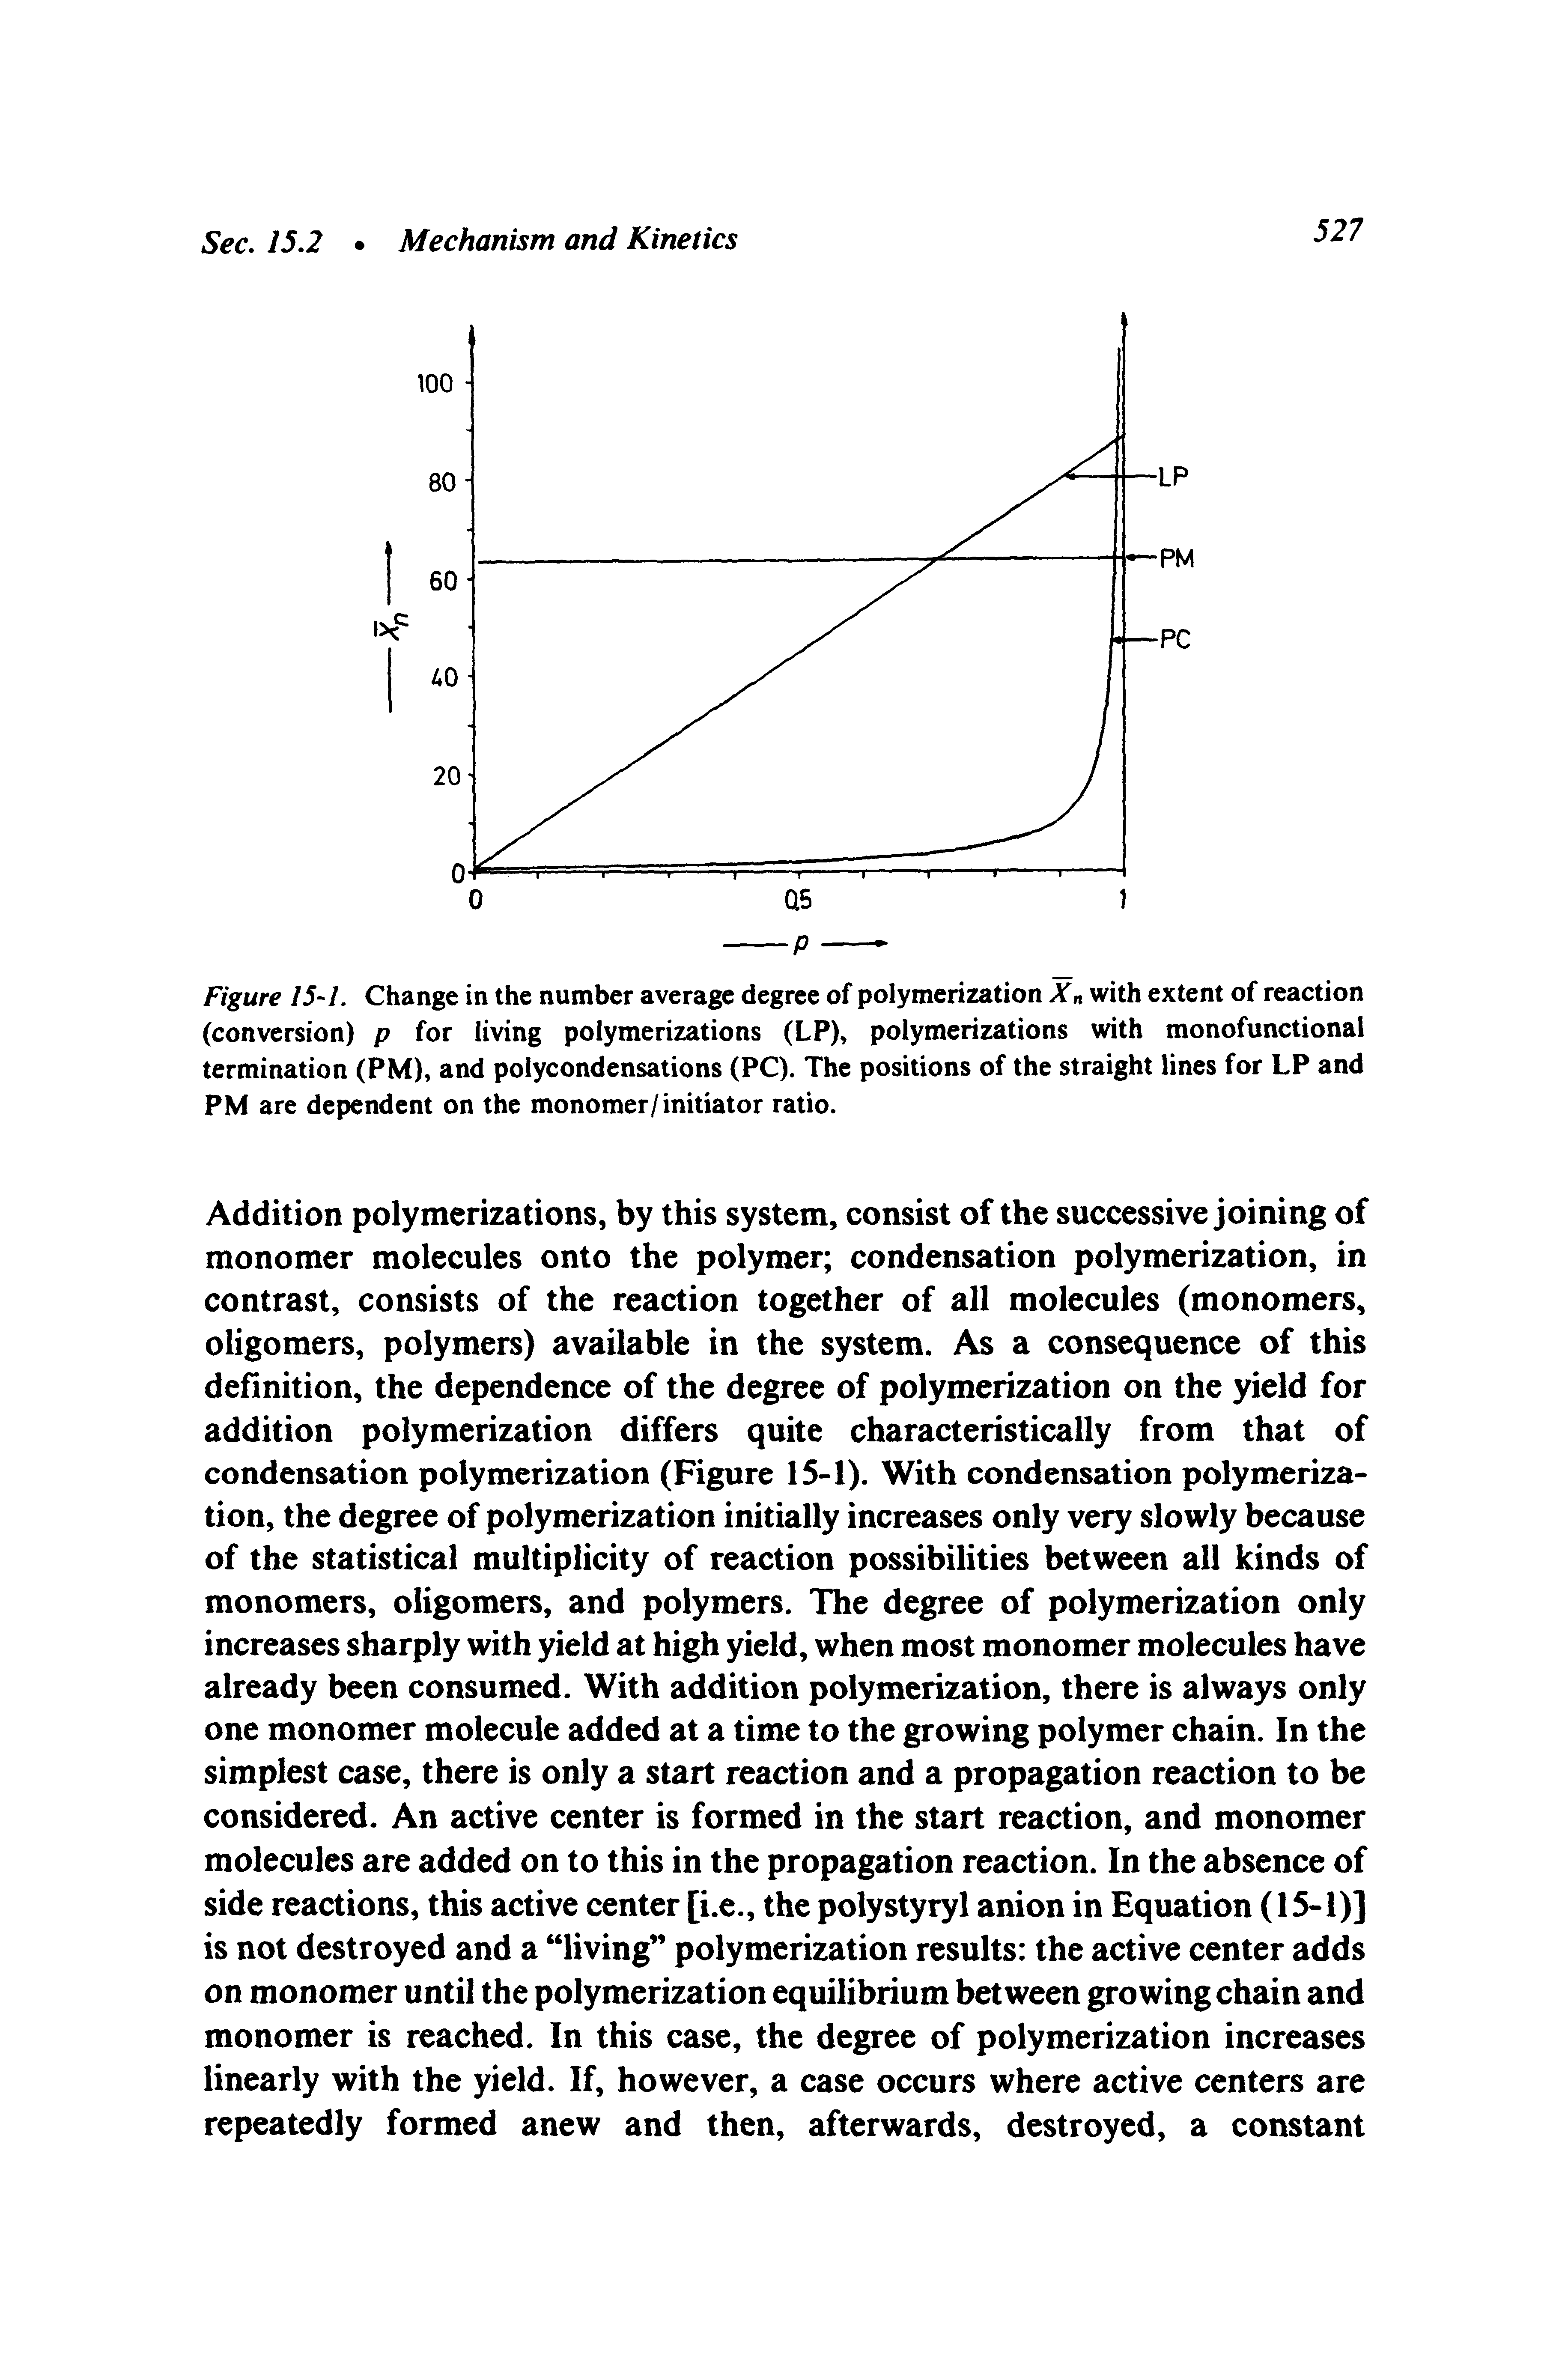 Figure 15-1. Change in the number average degree of polymerization Xn with extent of reaction (conversion) p for living polymerizations (LP), polymerizations with monofunctional termination (PM), and polycondensations (PC). The positions of the straight lines for LP and PM are dependent on the monomer/initiator ratio.